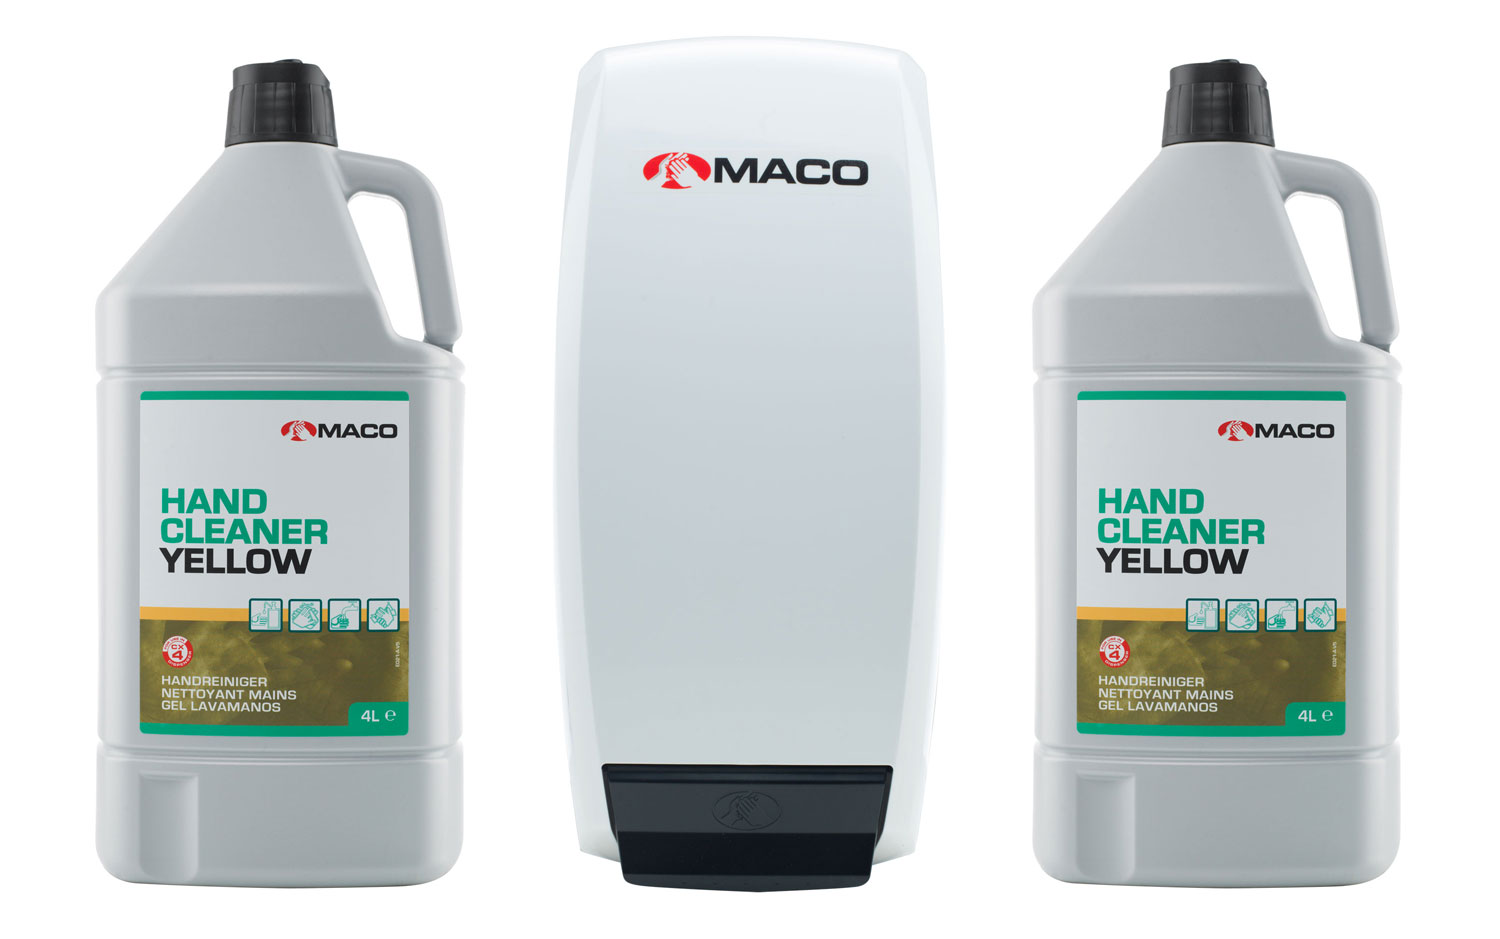 MACO Hand Cleaner - Yellow - set 2x4 liters and dispenser 2 x 4 ltr(s)